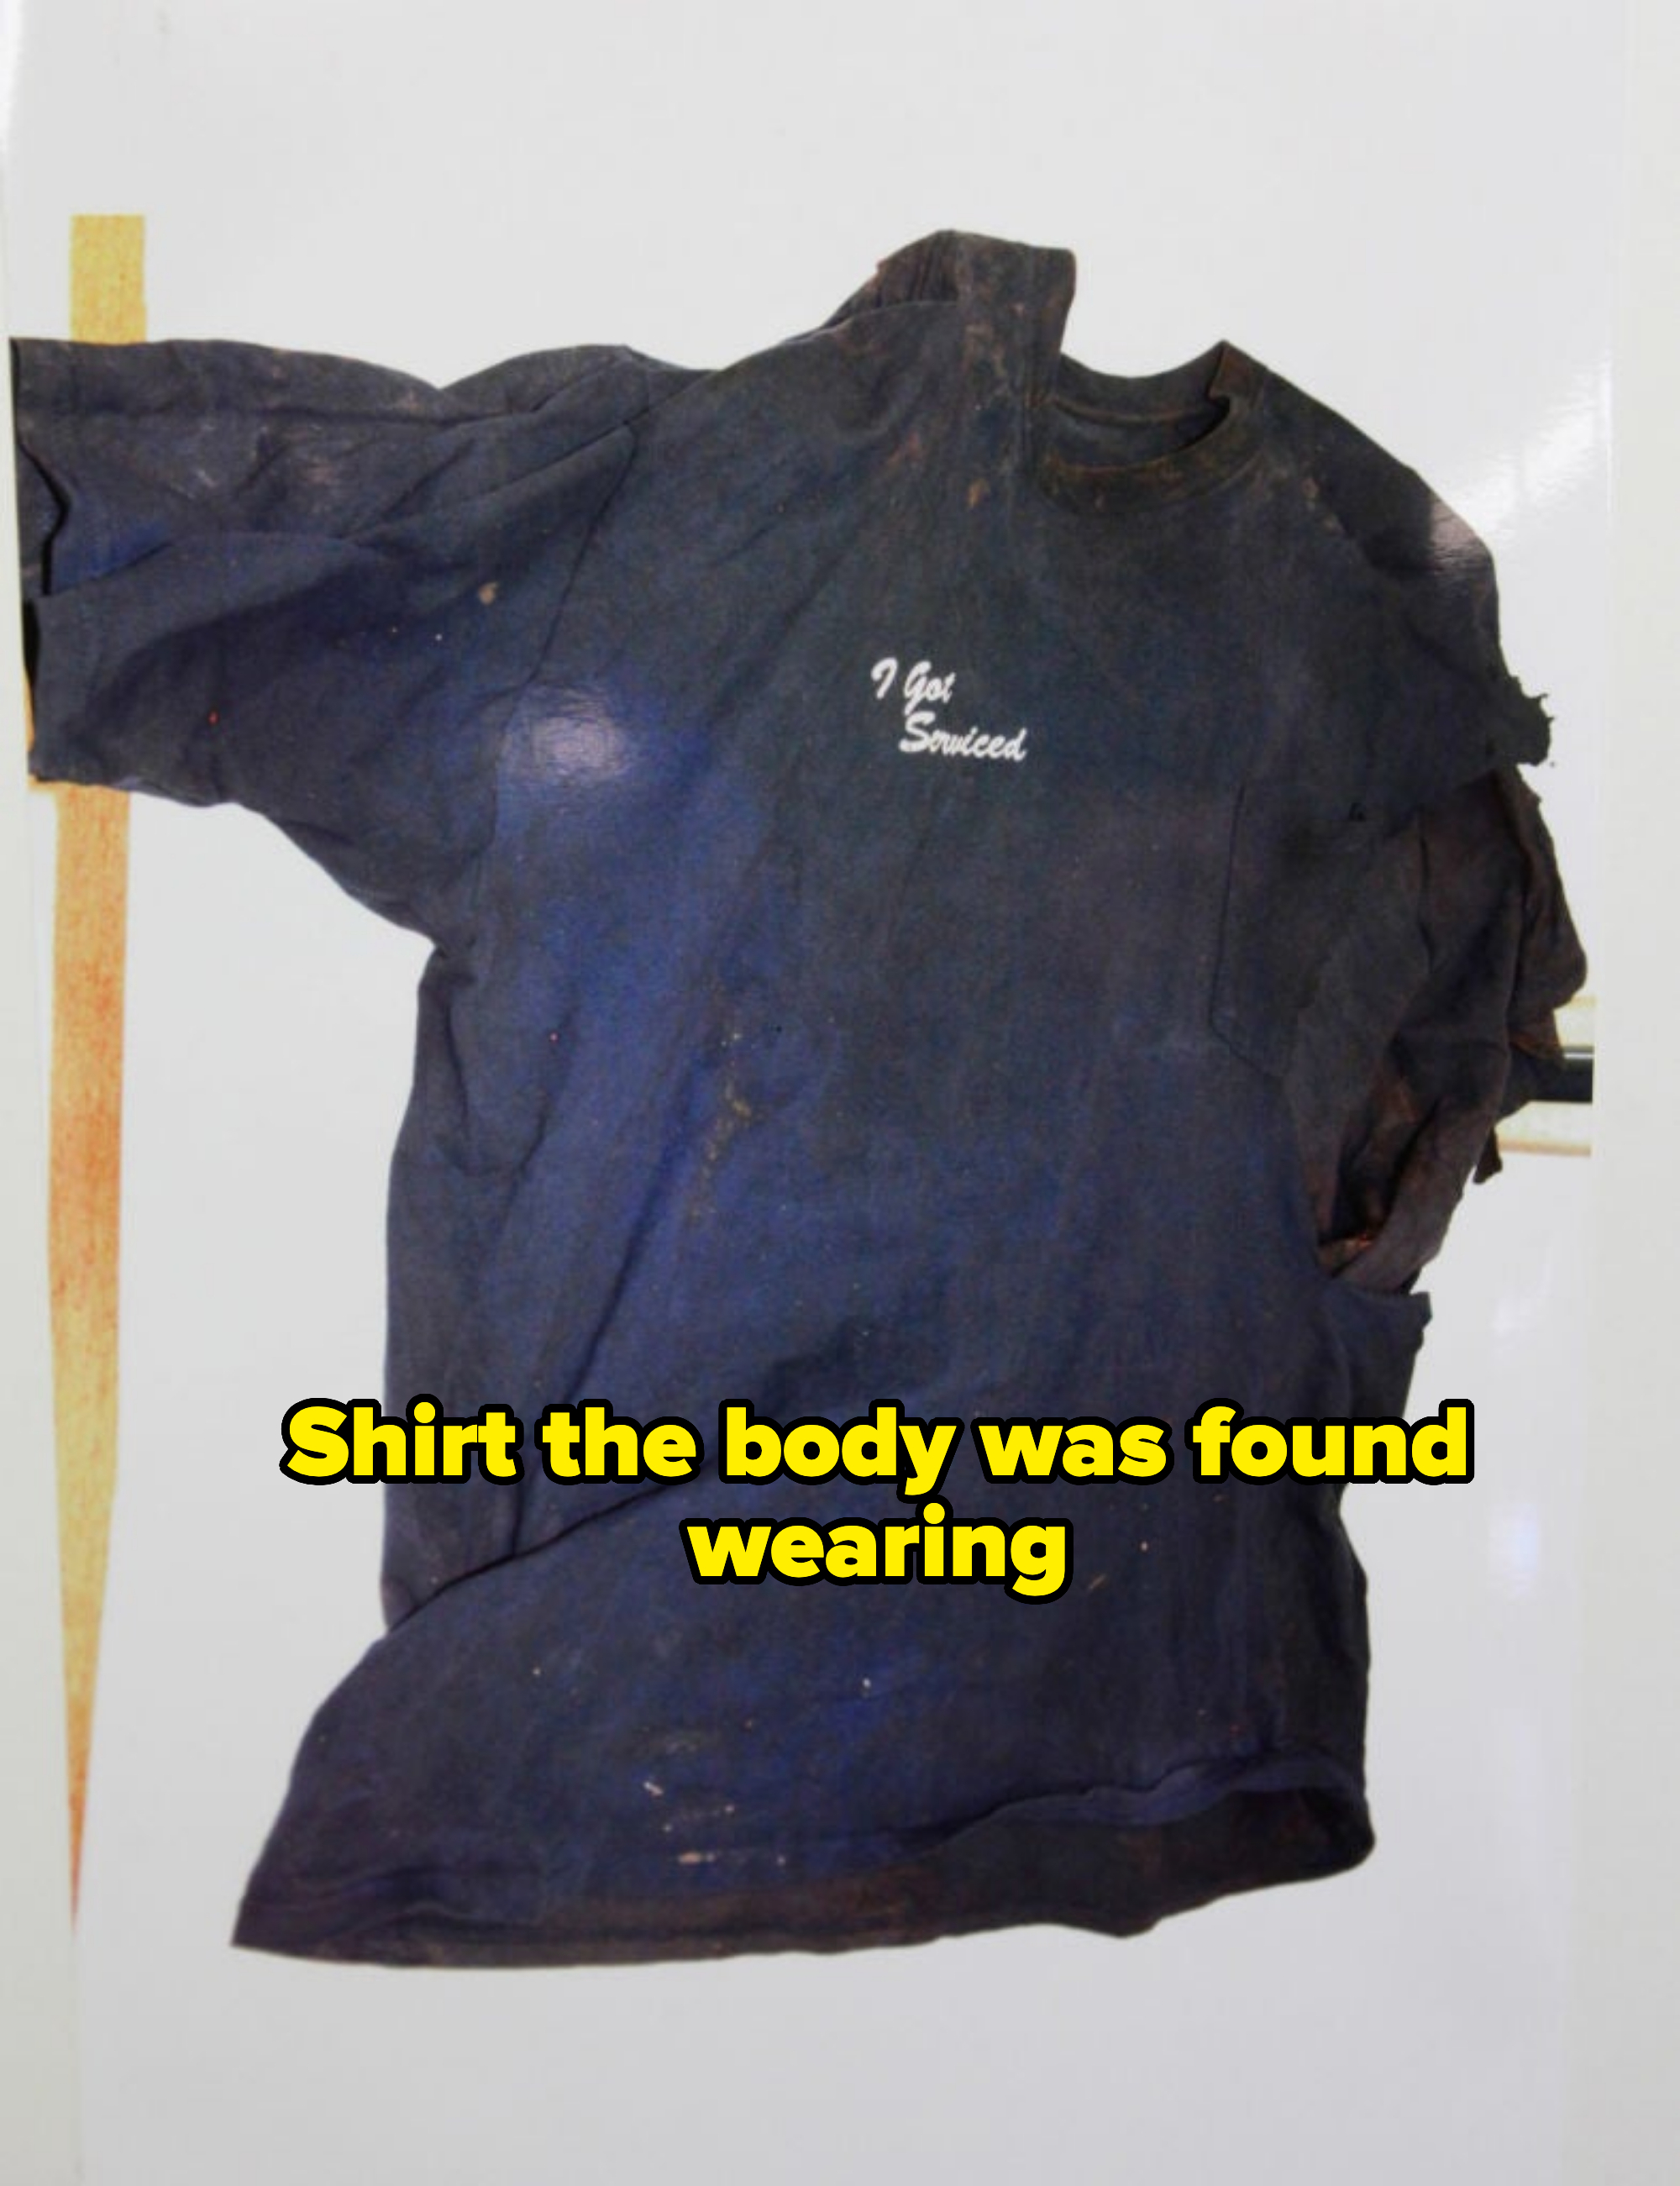 &quot;Shirt the body was found wearing&quot;